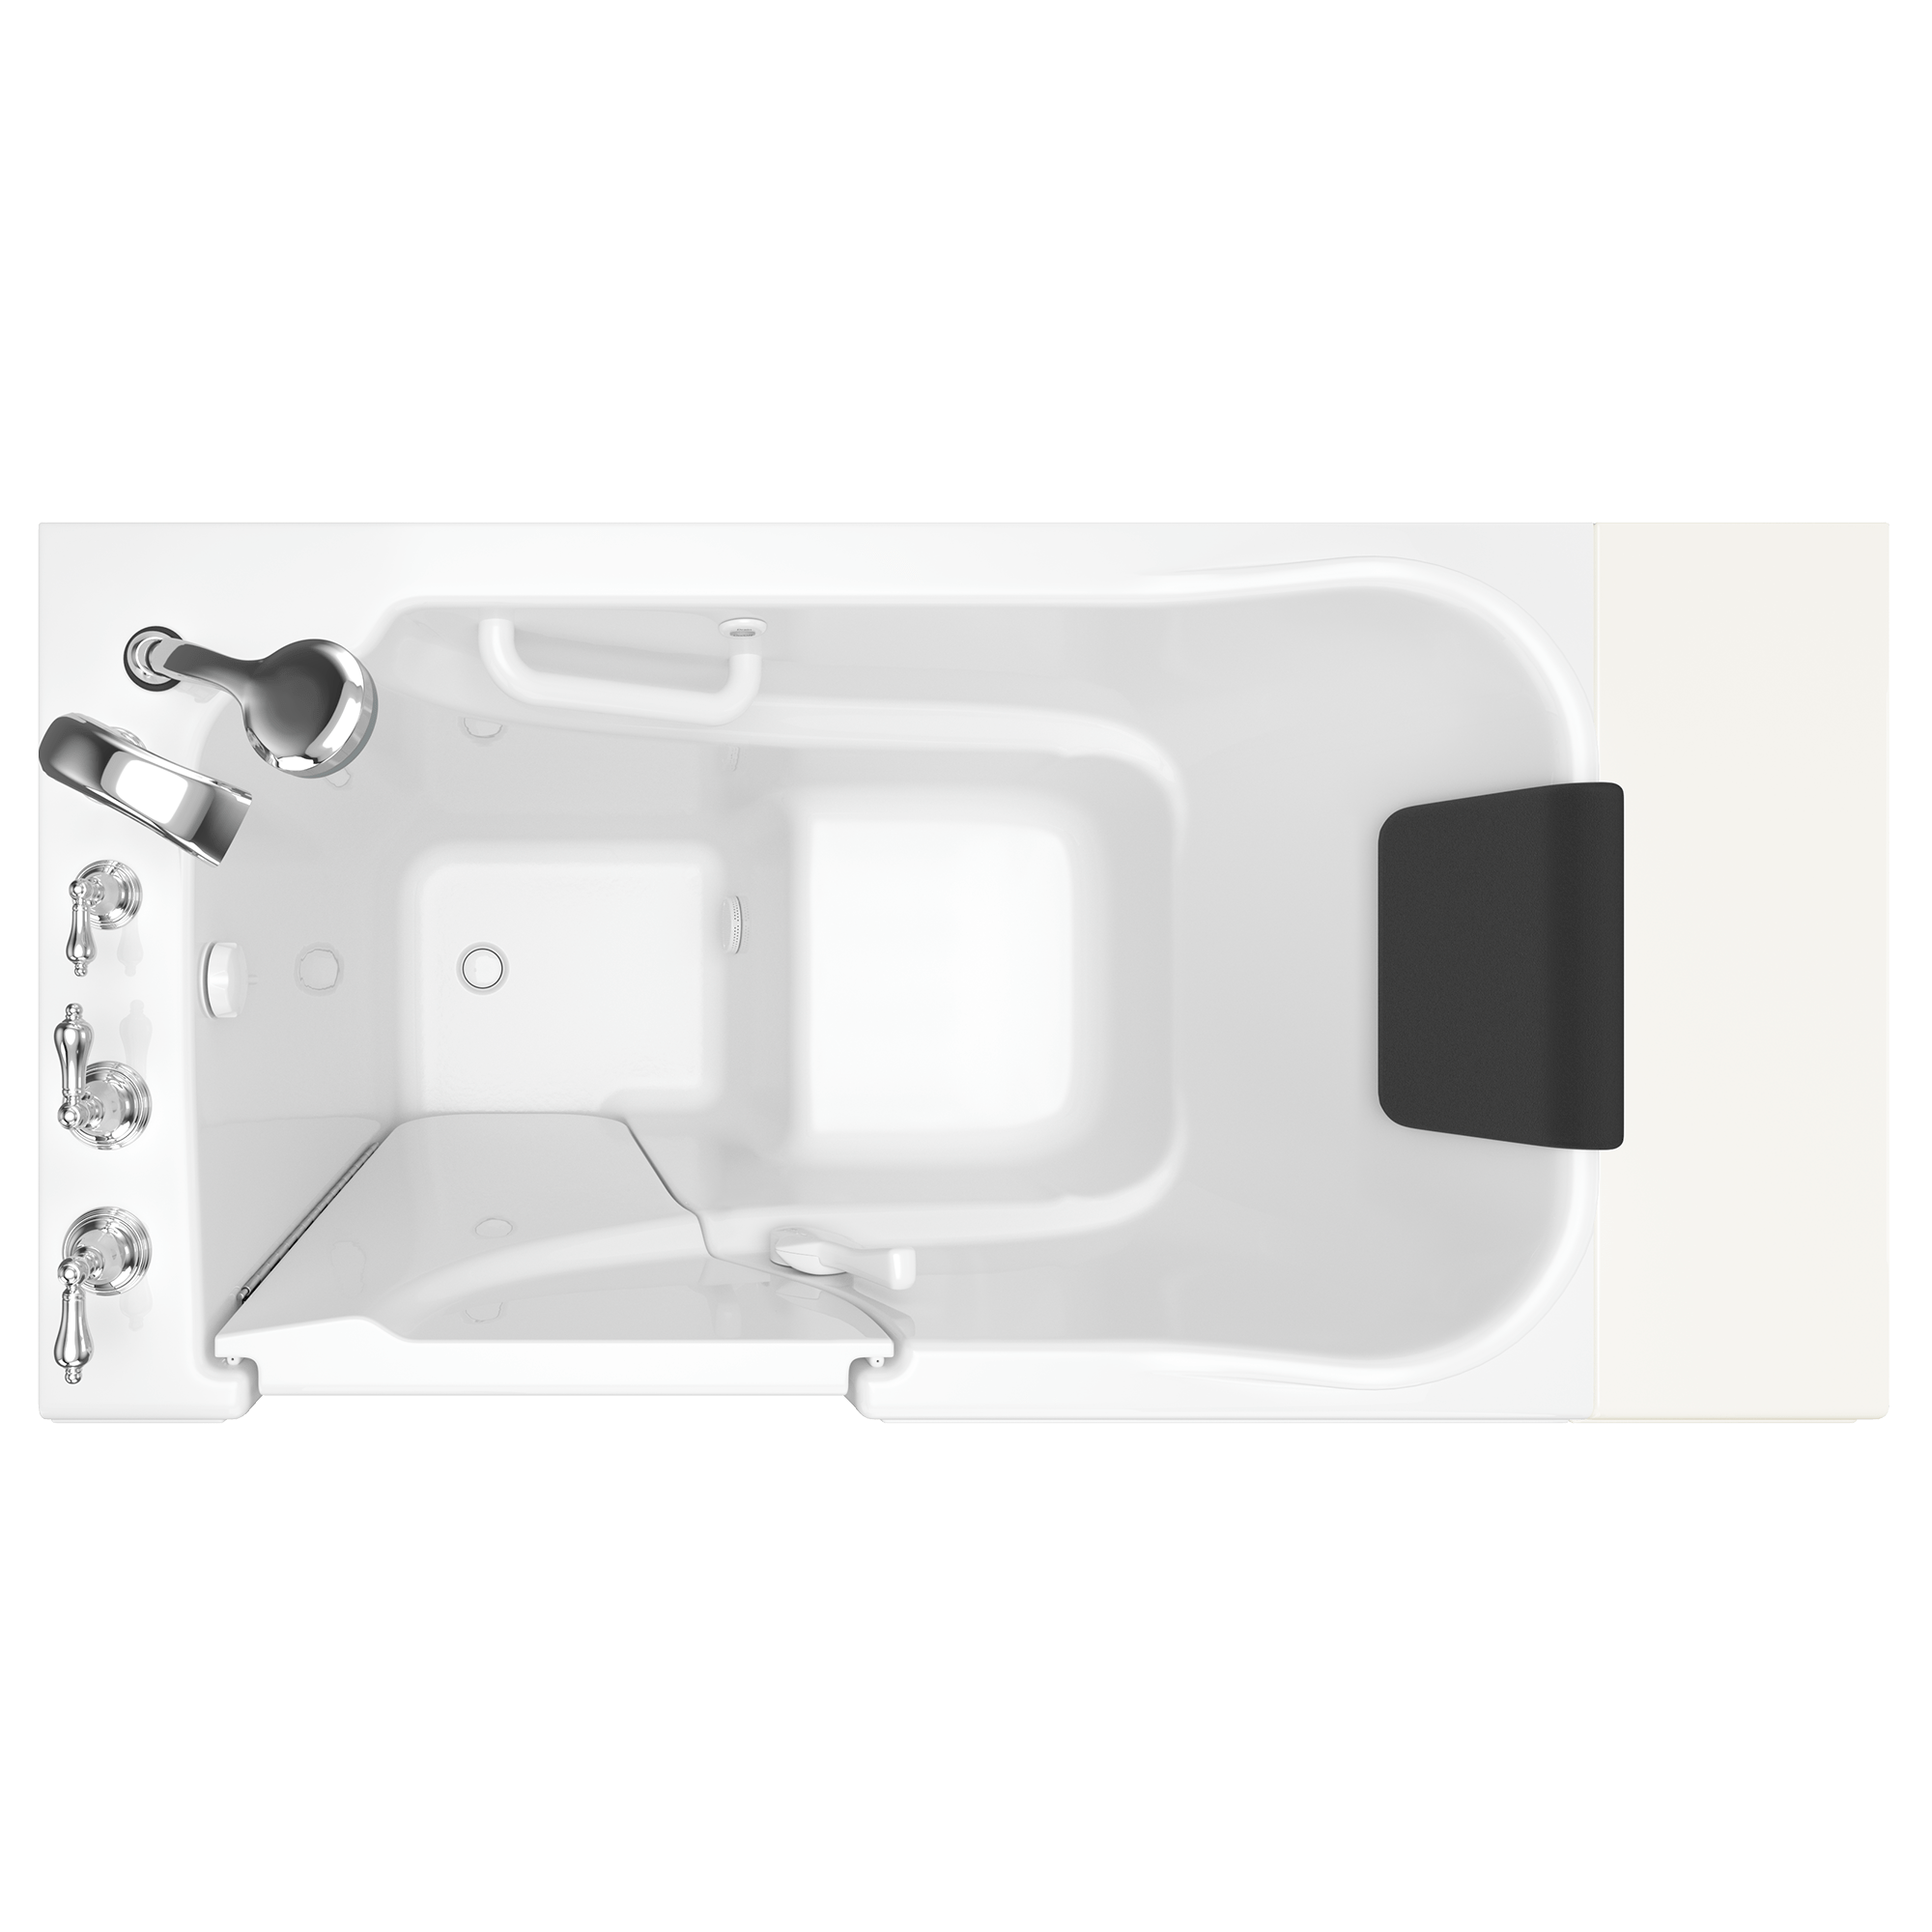 Gelcoat Premium Series 30 x 52  Inch Walk in Tub With Soaker System   Left Hand Drain With Faucet WIB WHITE